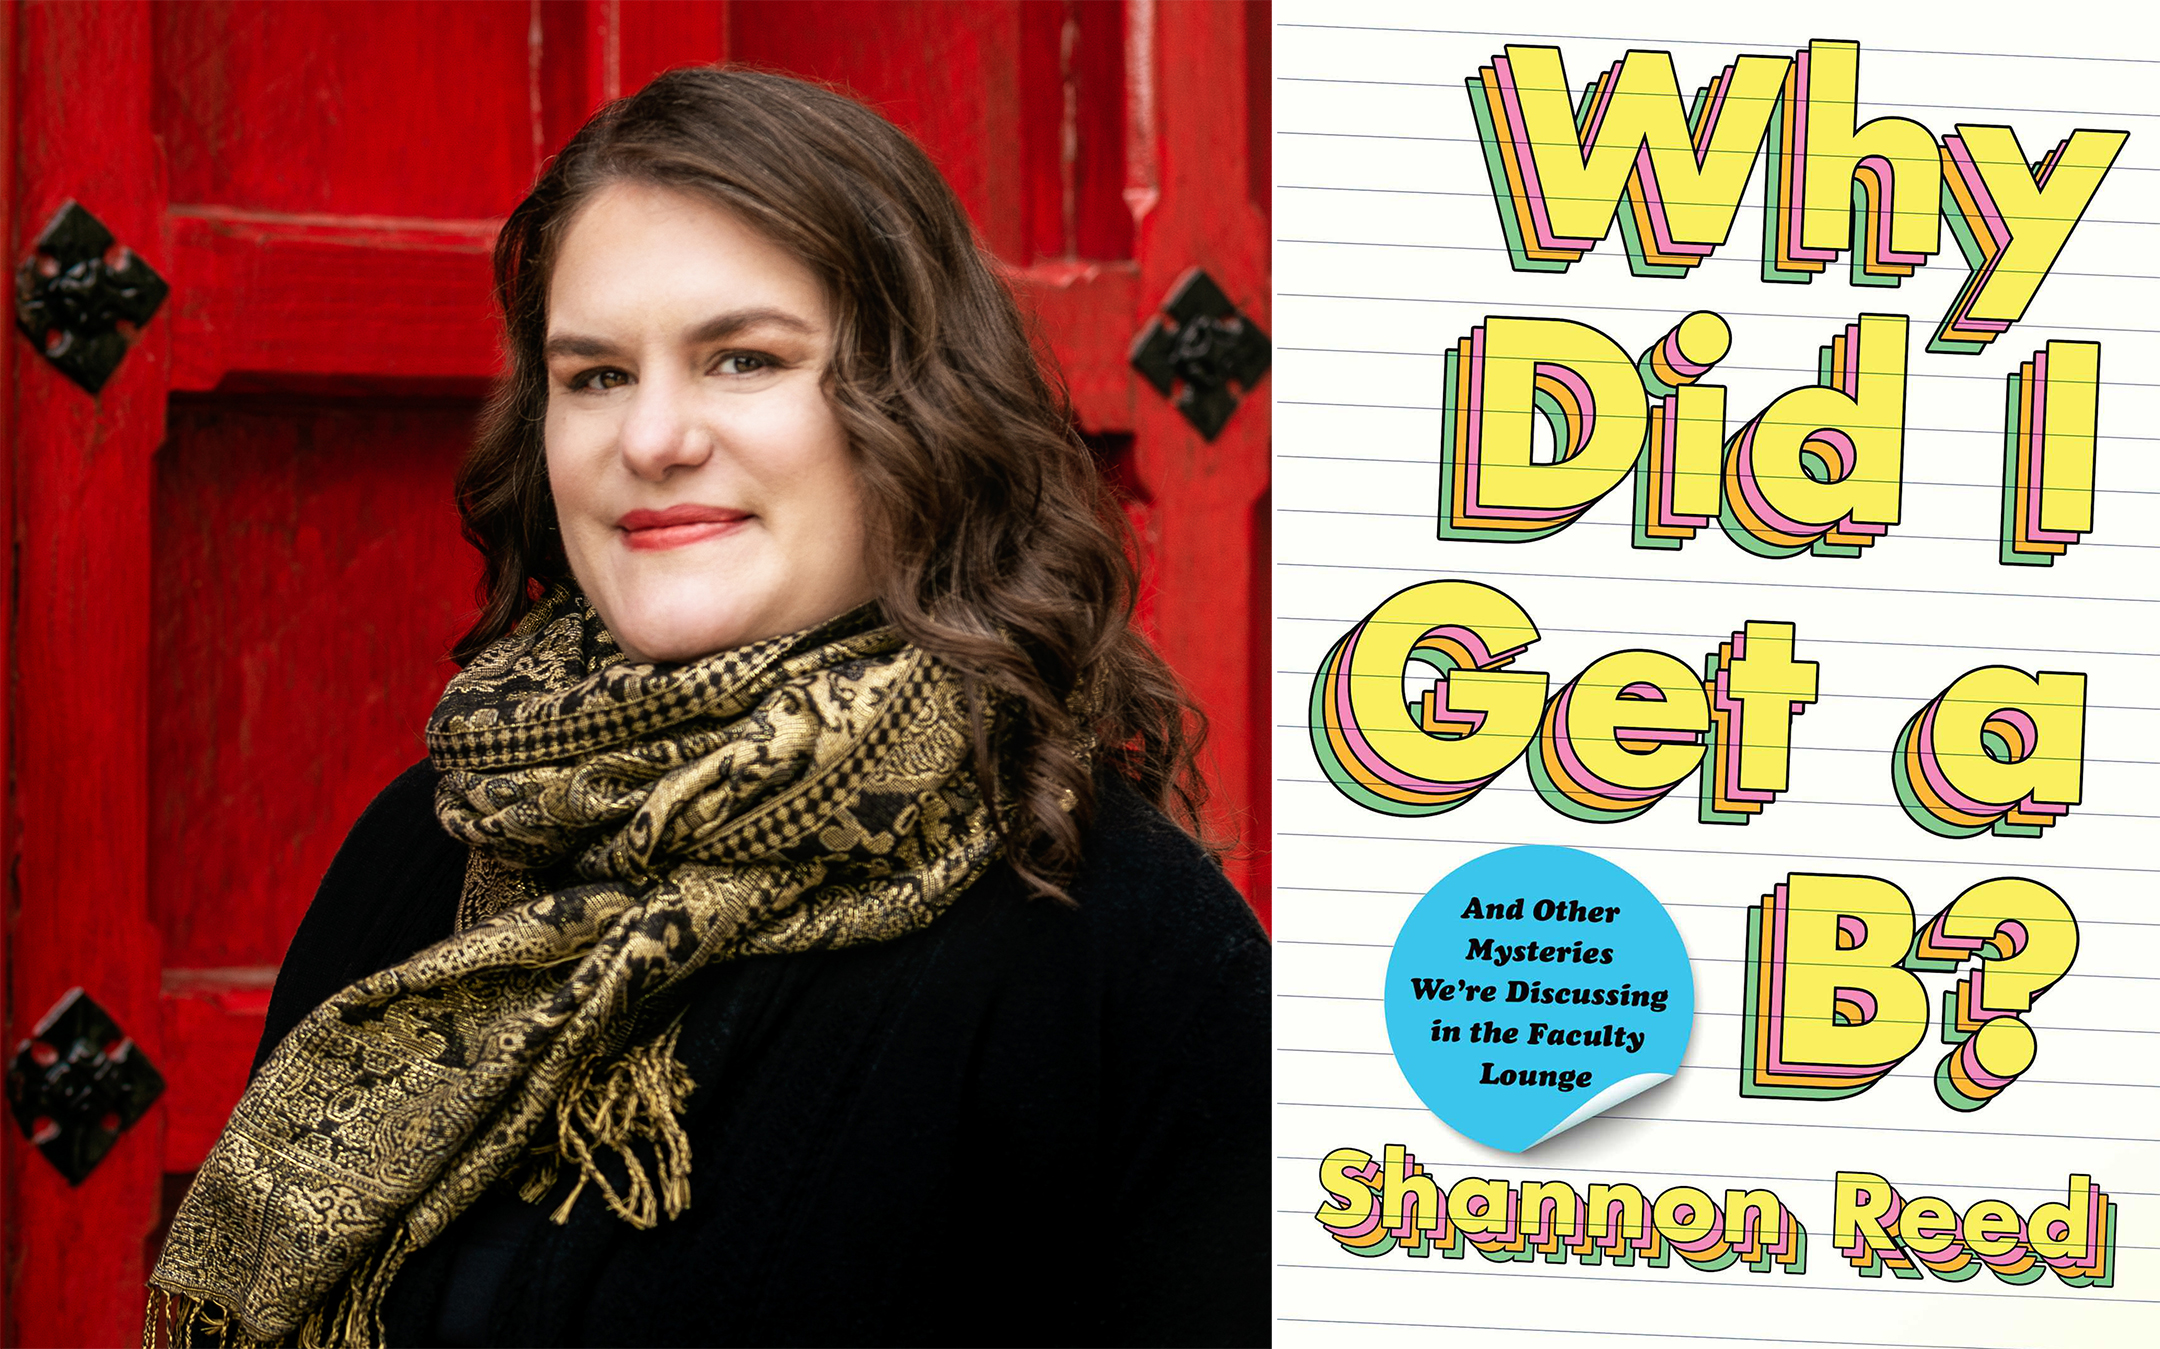 photo of author shannon reed on the left, the cover of the book why did i get a b on the right